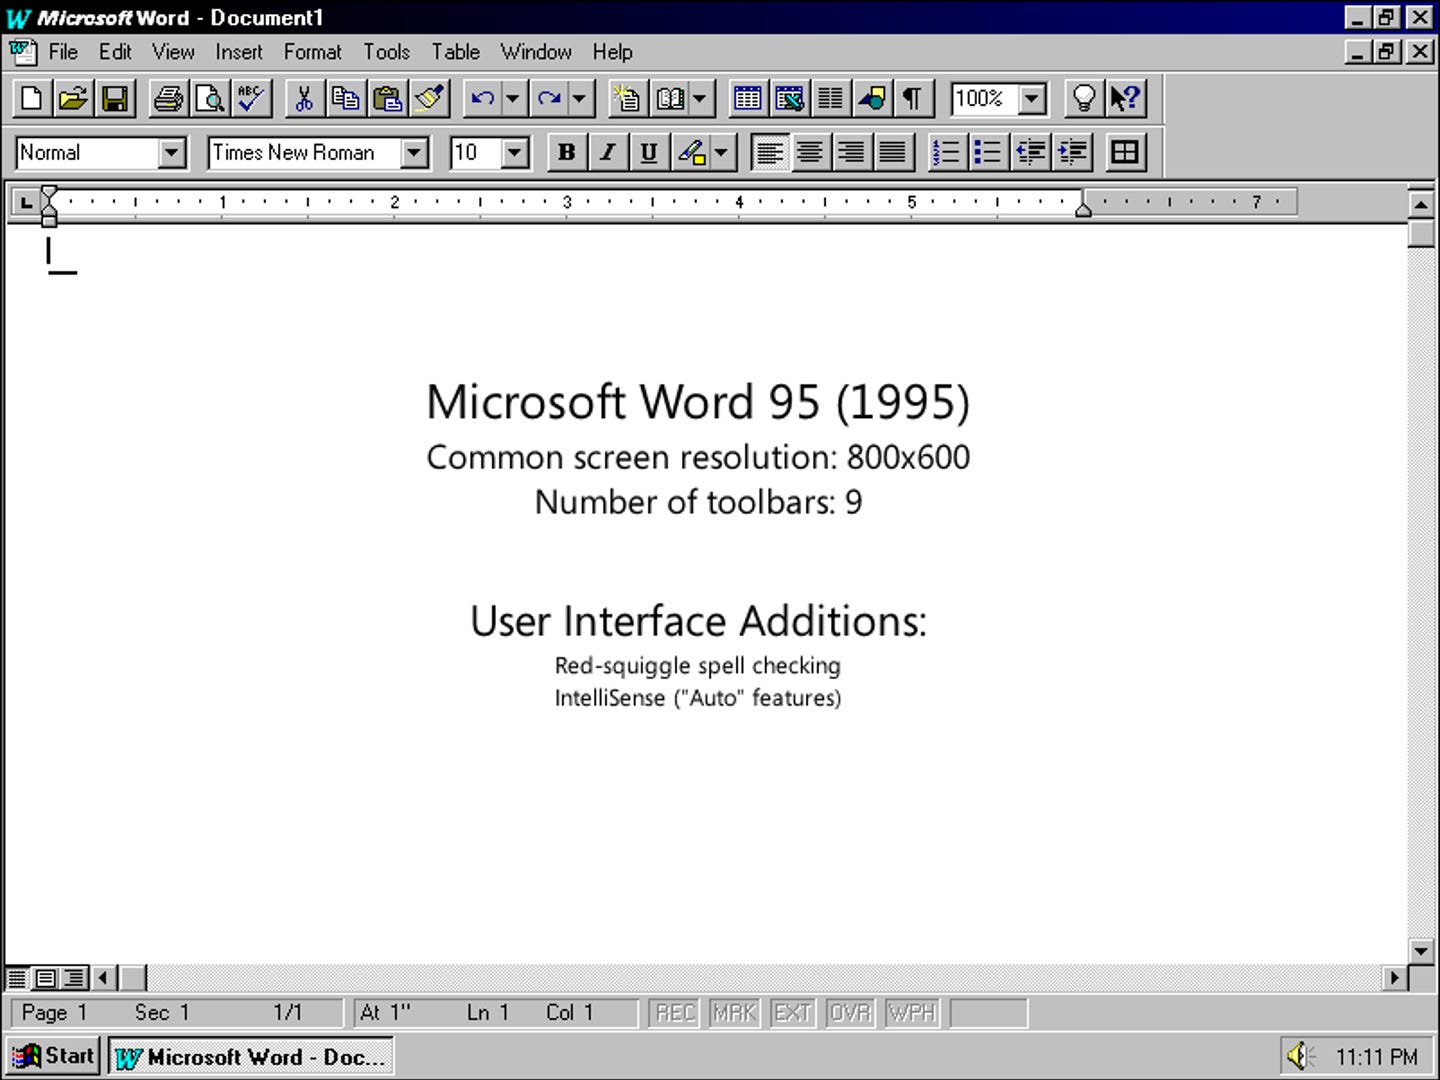 Microsoft Word 95 (1995) Common screen resolution: 800x600 Number of toolbars: 9 User Interface Additions: Red-squiggle spell checking IntelliSense ("Auto" features)